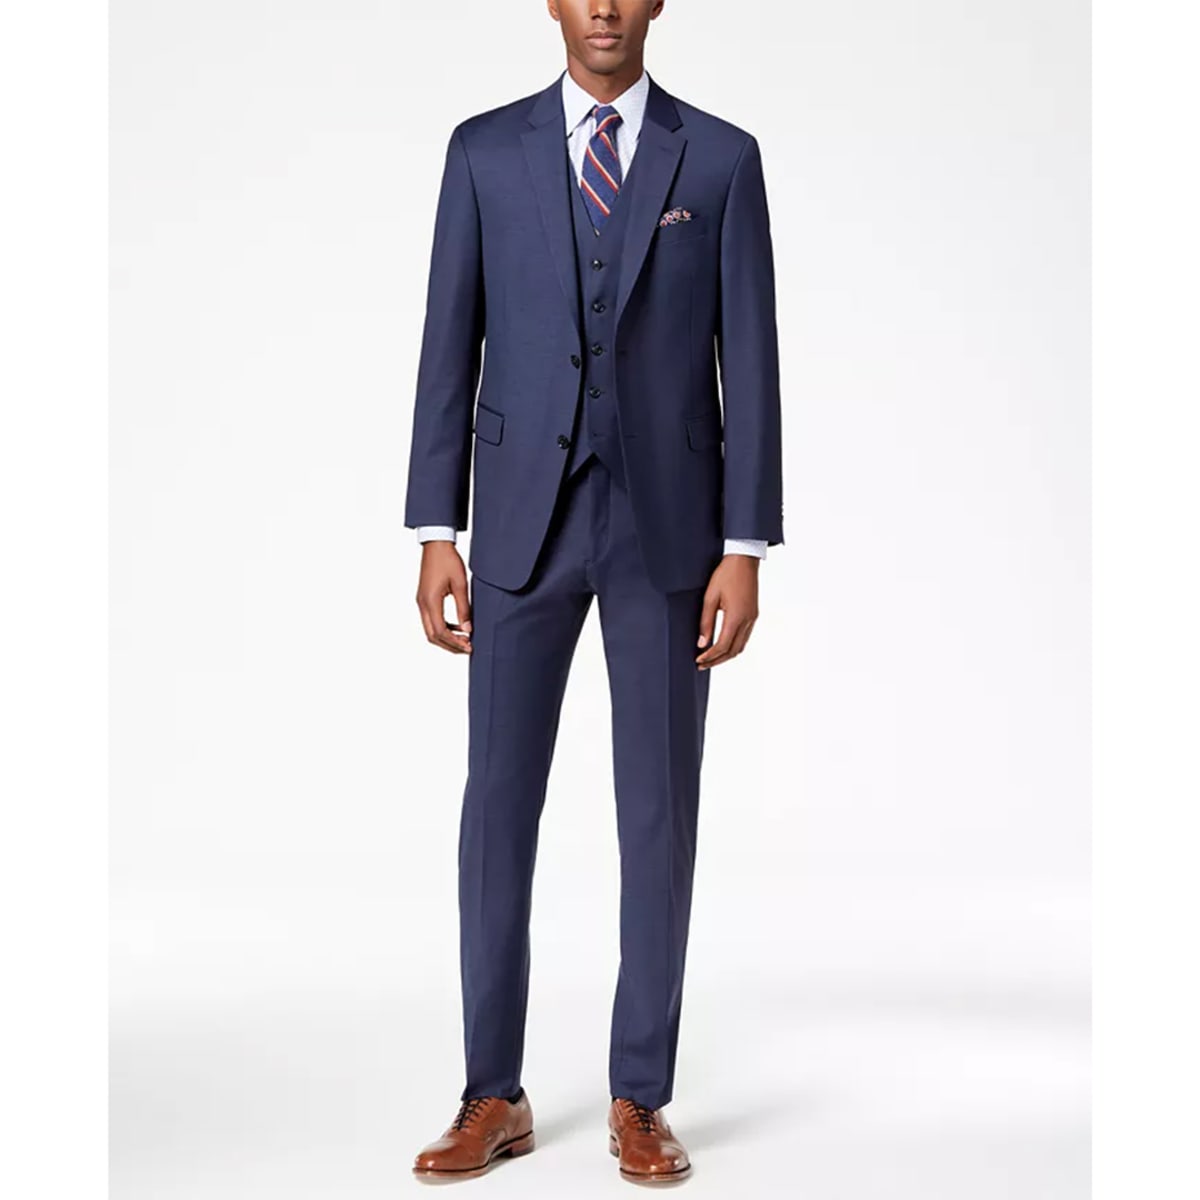 This Tommy Hilfiger Suit Has All The and Style You Could For - Journal